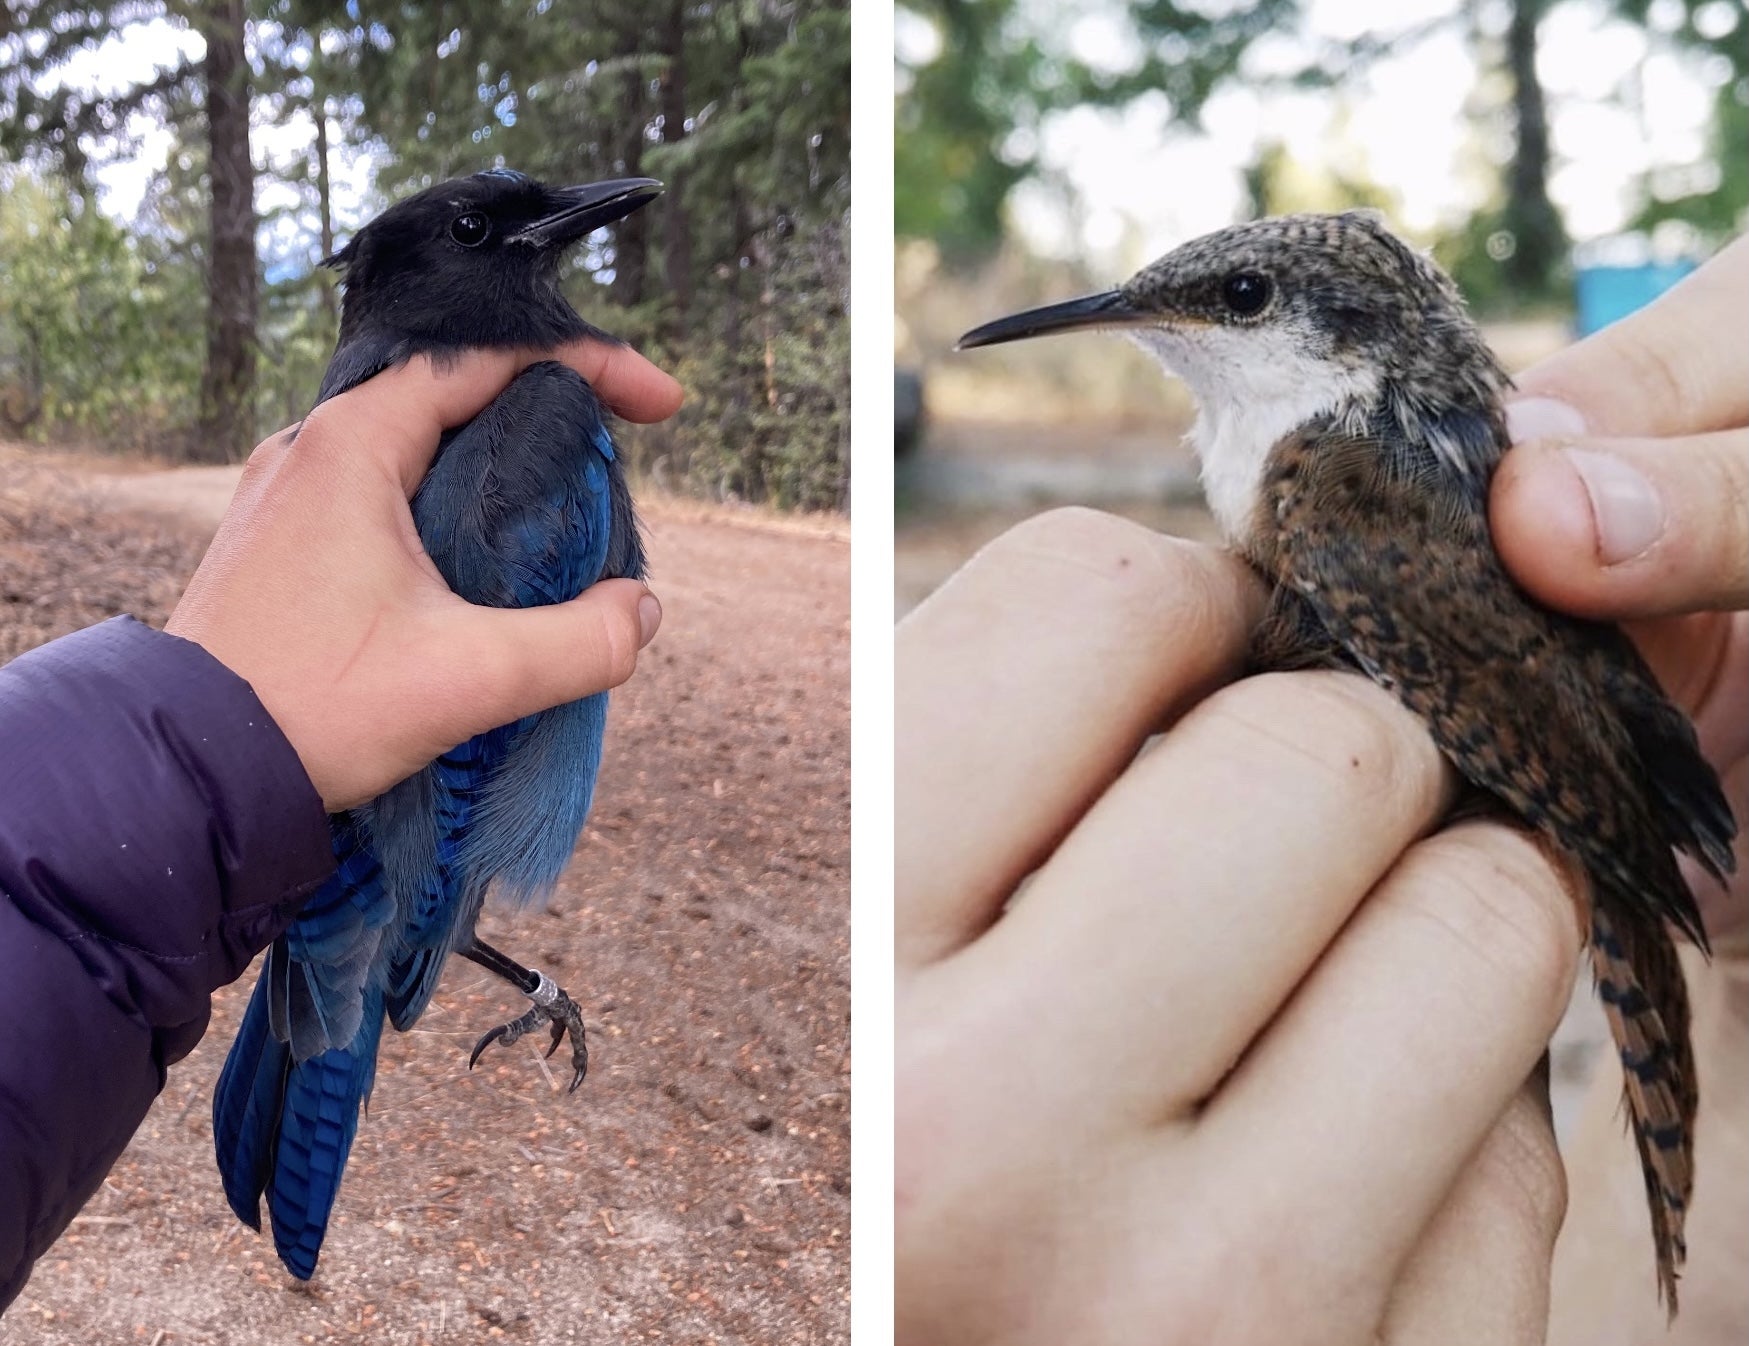 2 different birds, one blue and one rusty brown